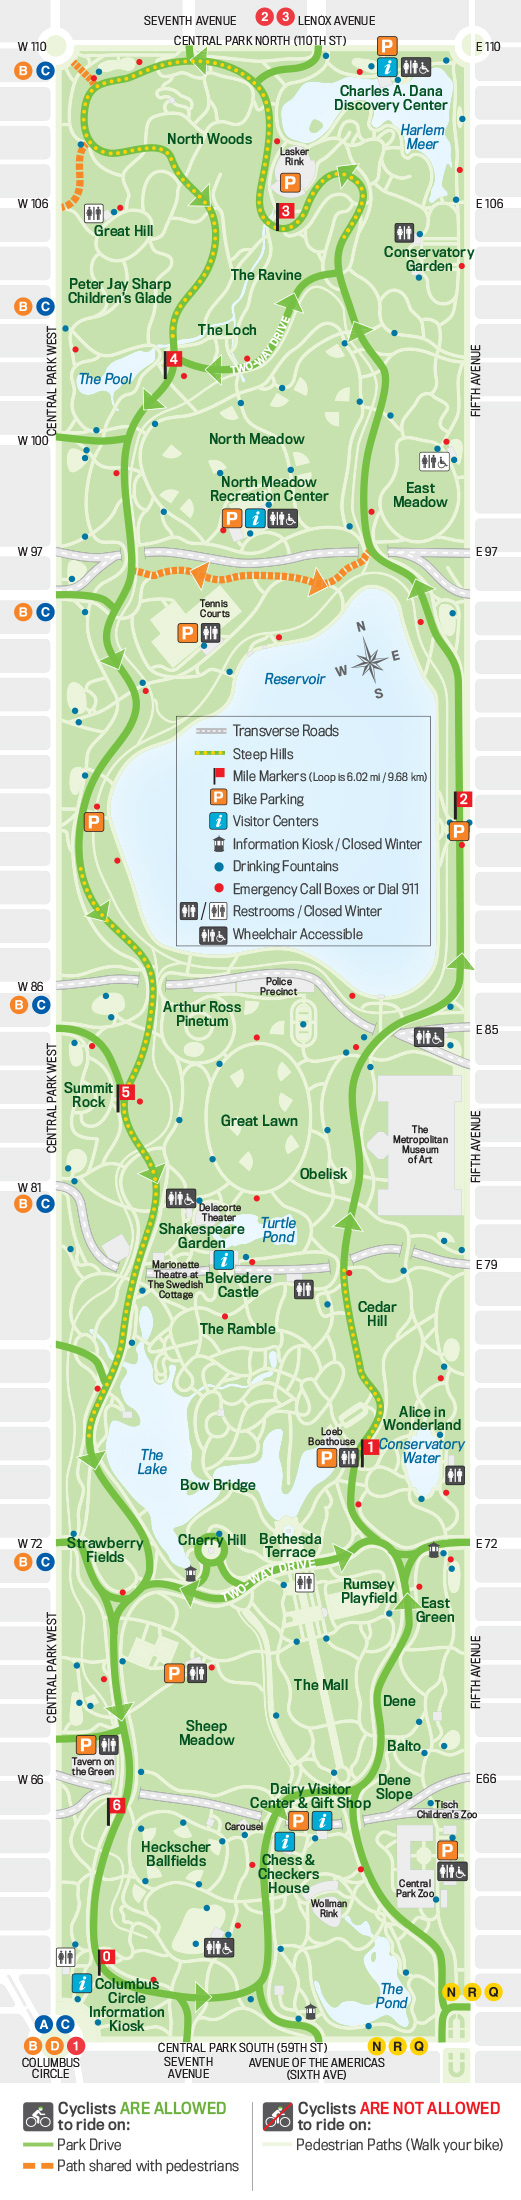 27 Things To Do In Central Park | Free Toursfoot - Printable Walking Map Of Midtown Manhattan